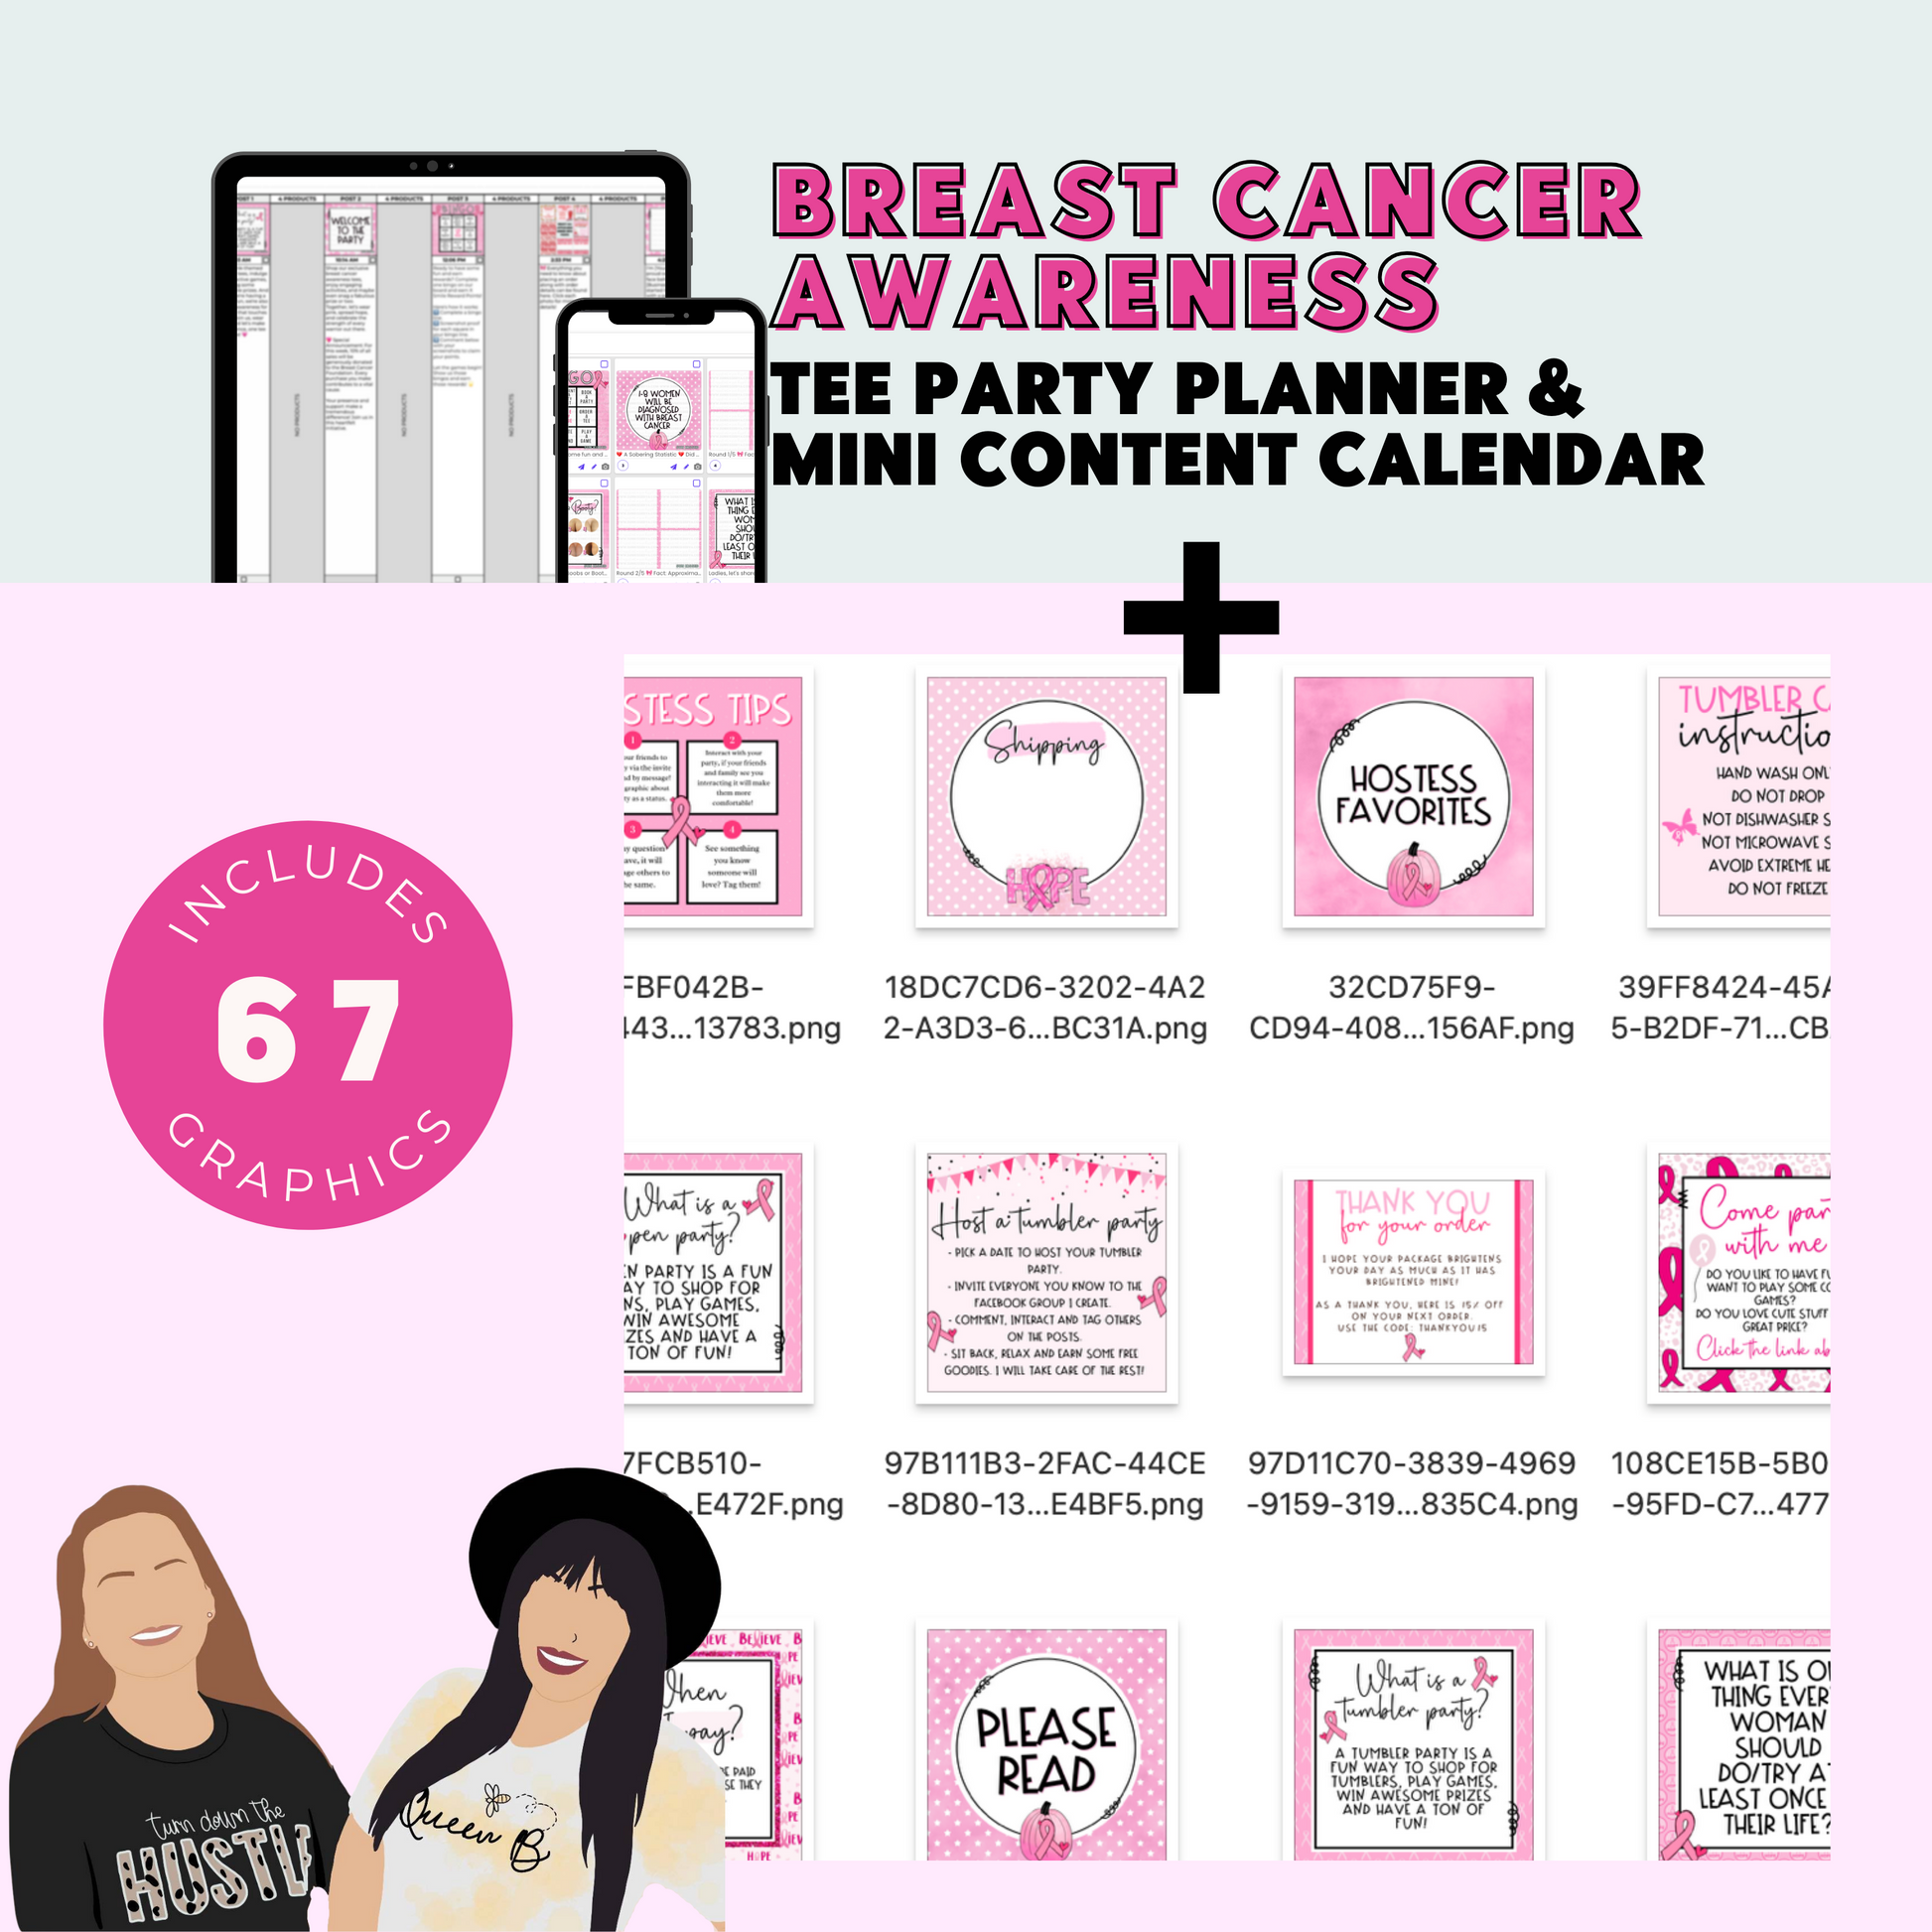 Breast Cancer Awareness Tee Party Planner | Sun Kissed Virtual Assistant